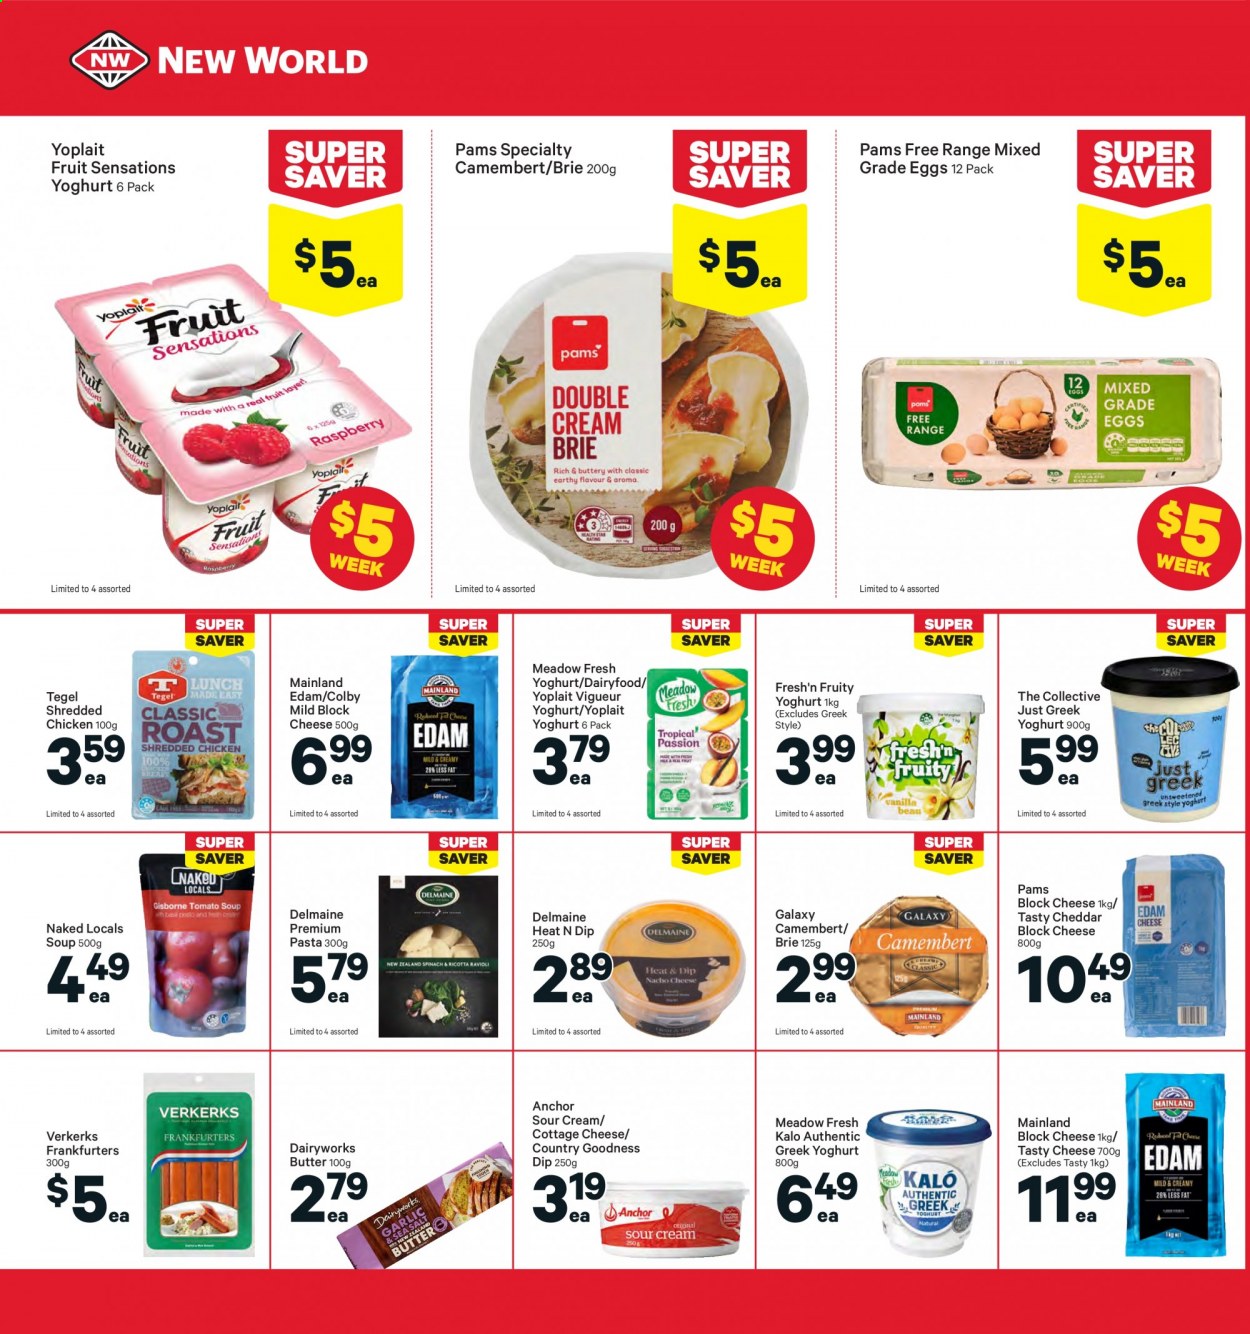 thumbnail - New World mailer - 12.07.2021 - 18.07.2021 - Sales products - soup, pasta, Delmaine, camembert, Colby cheese, cottage cheese, edam cheese, cheddar, cheese, brie, greek yoghurt, yoghurt, Fresh'n Fruity, Yoplait, eggs, butter, Anchor, sour cream, dip. Page 22.